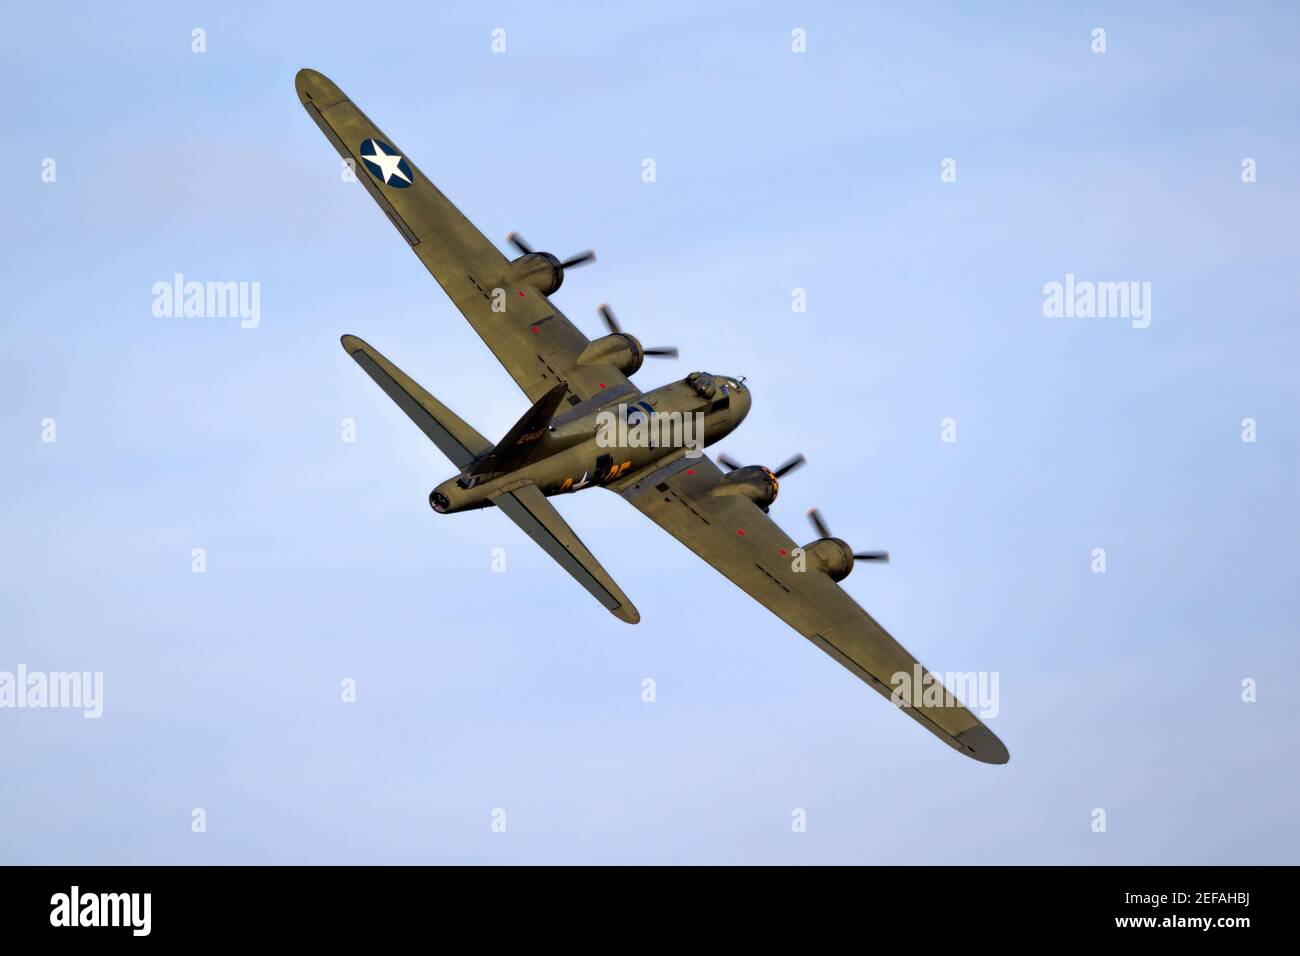 Vintage warbird US Air Force Boeing B-17 Flying Fortress WW2 bomber plane perforing at the Sanice Sunset Airshow. Belgium - September 13, 2019. Stock Photo